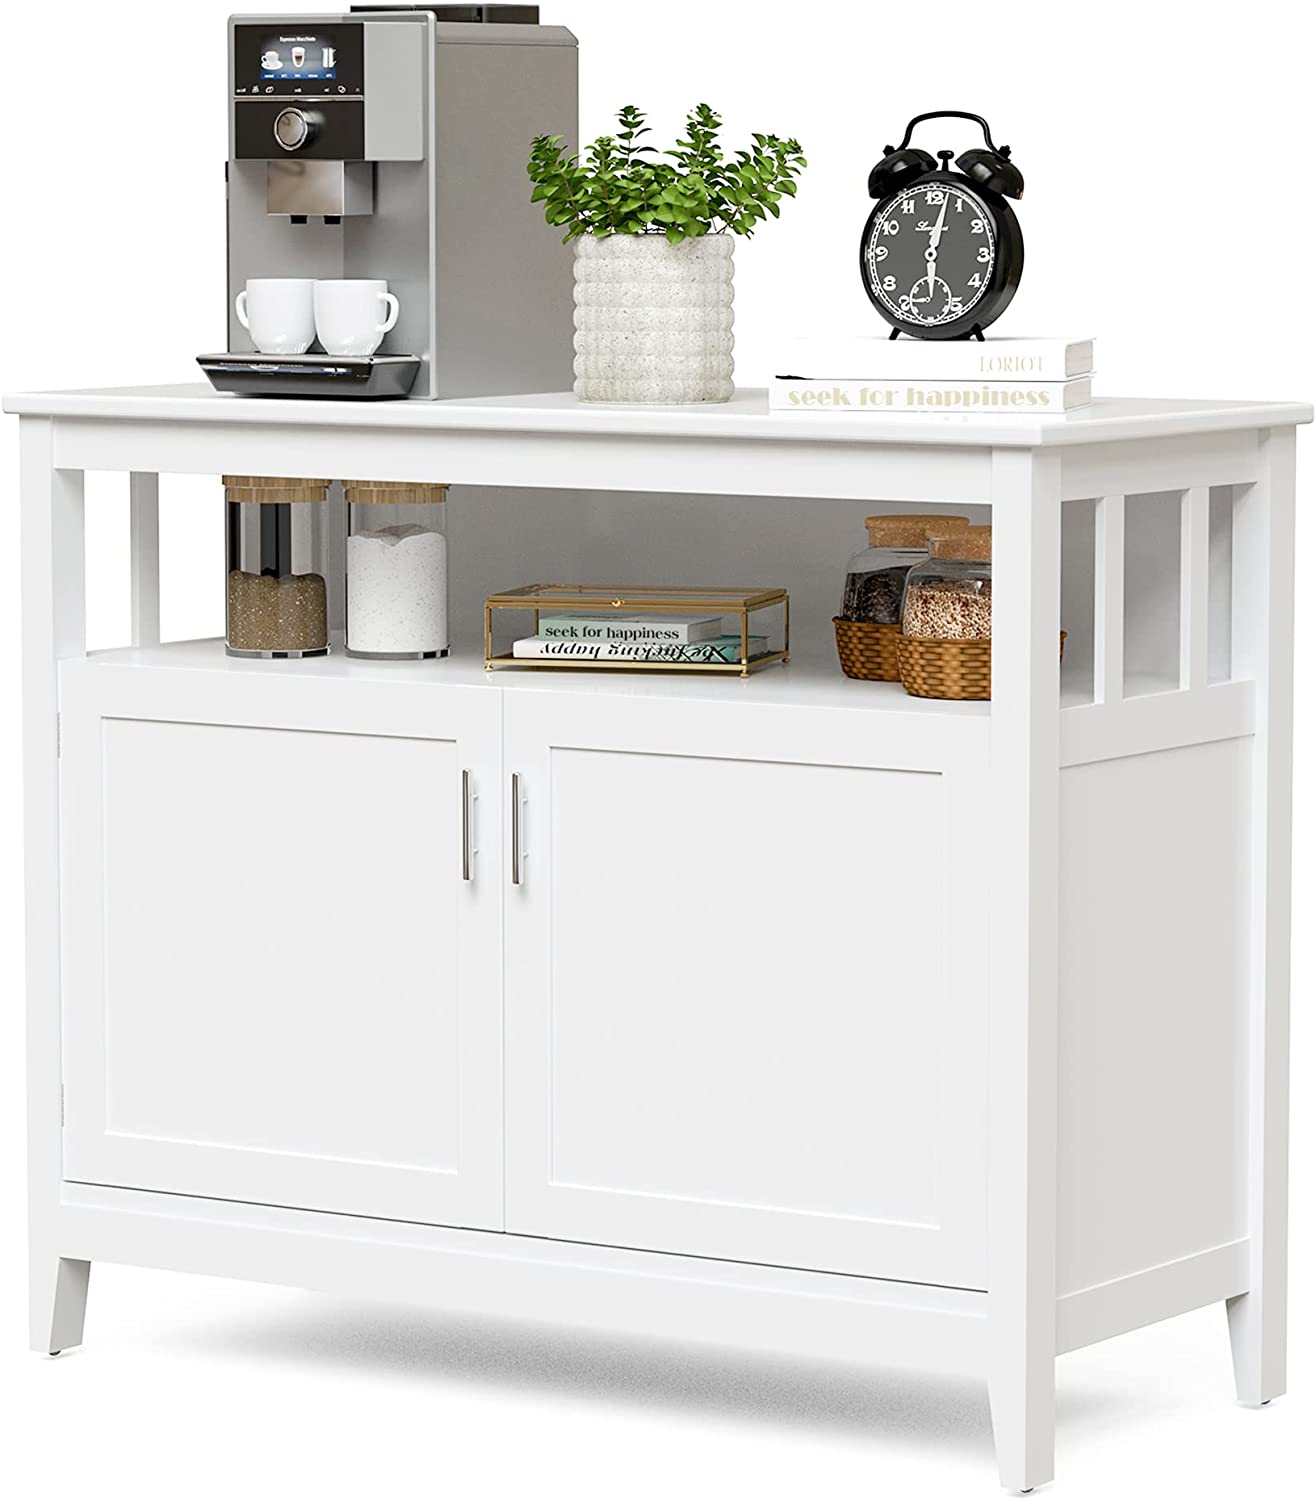 Buffet Cabinet with Storage, Freestanding Kitchen Cabinet with Adjustable Shelf, Storage Sideboard Console Table, 45 x 20 x 36 inches